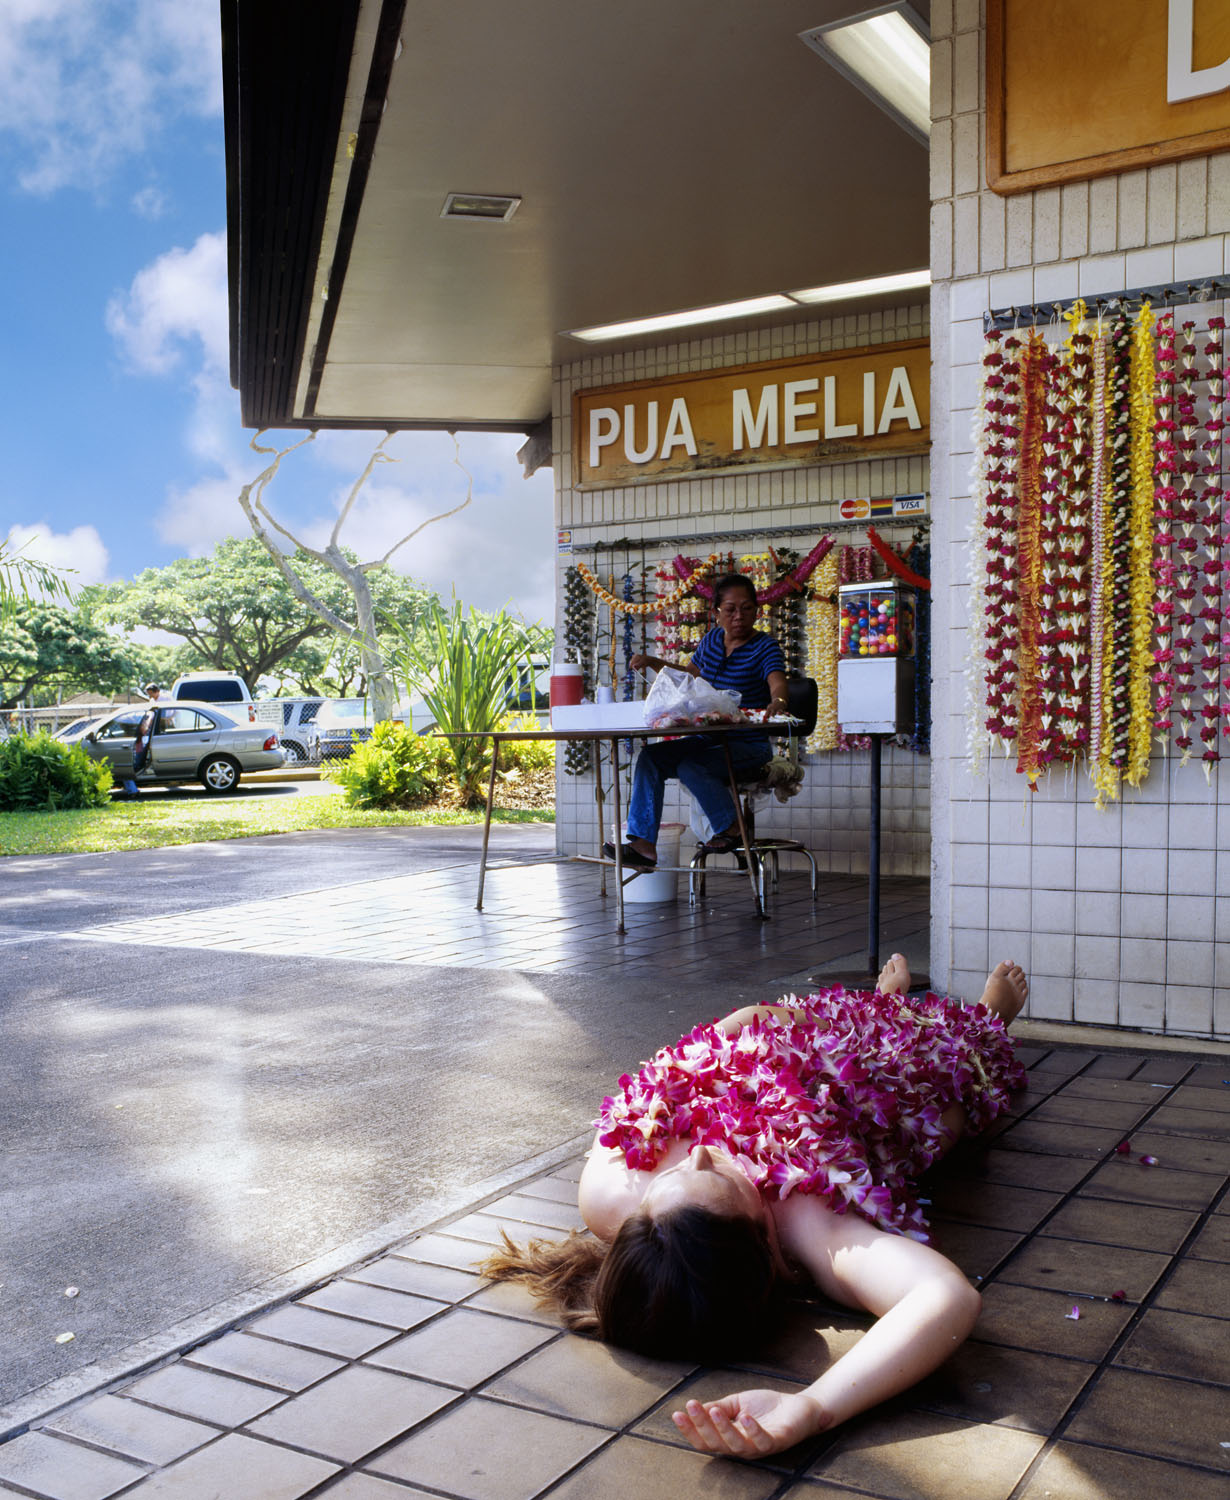 Adrienne Pao, Lei Stand Protest / Lei Pua Kapa, from the series “Hawaiian Cover-Ups,” 2004. LightJet print. Courtesy of the artist